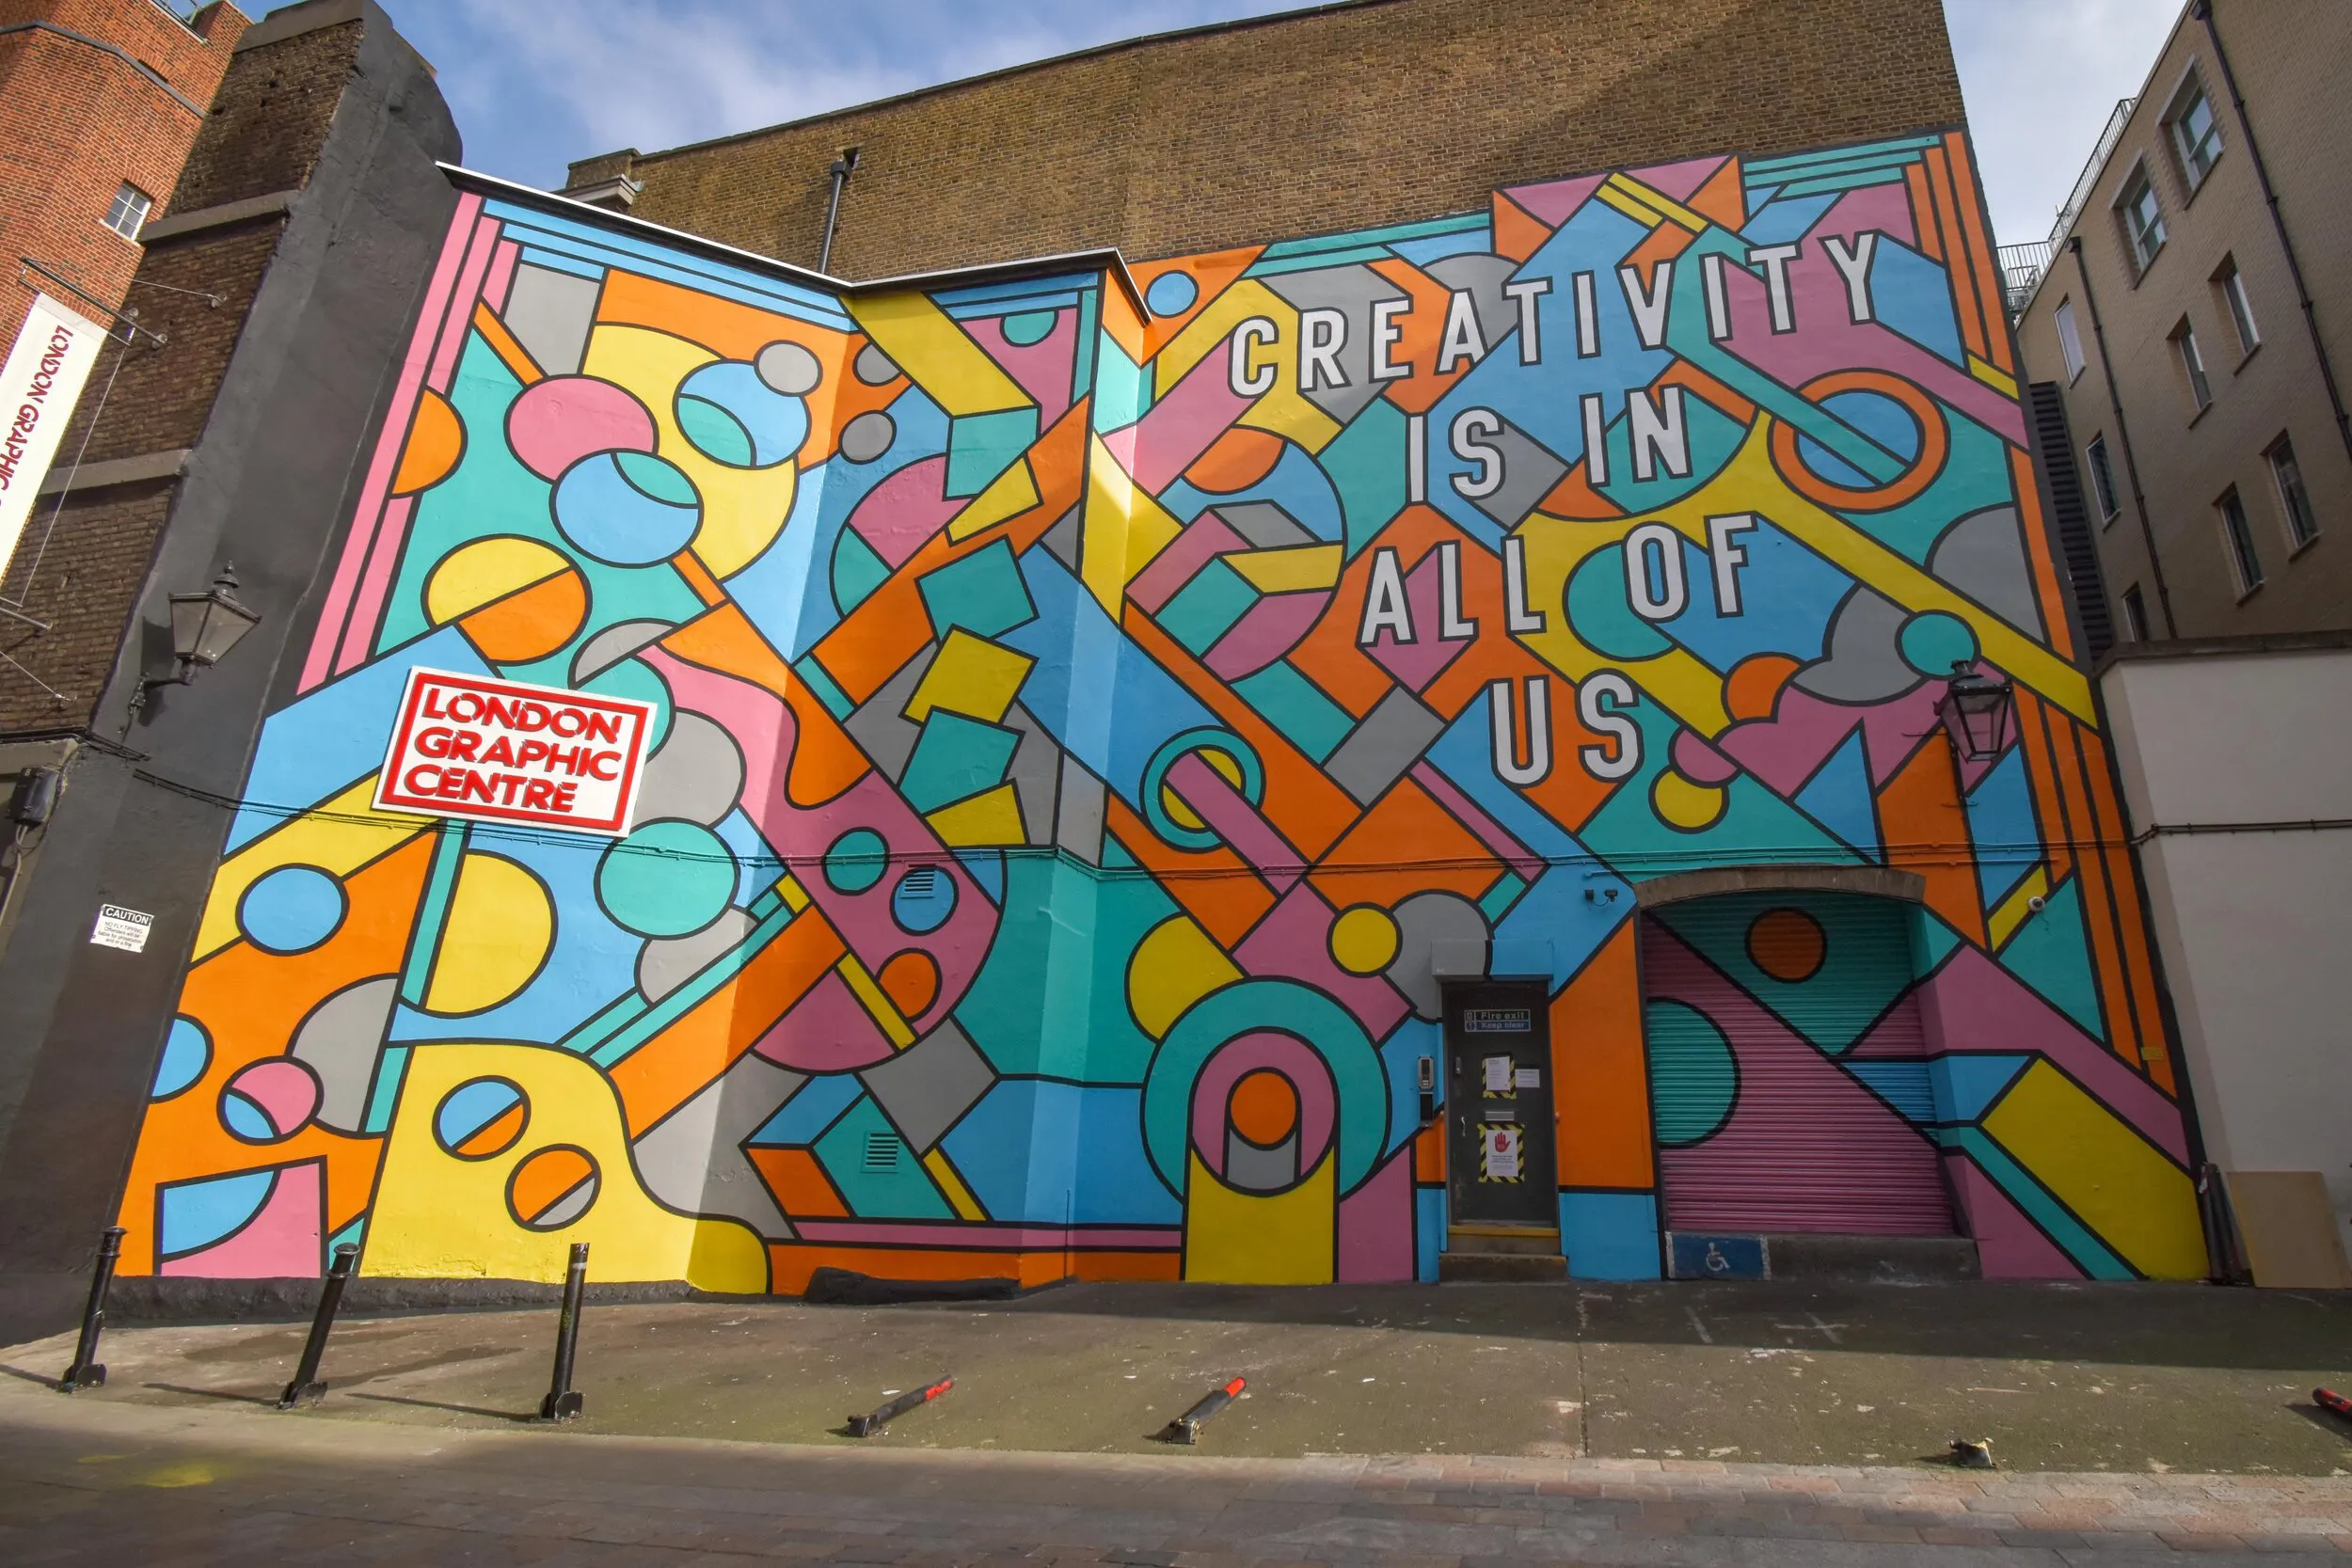 London Graphic Centre in United Kingdom, europe | Art - Country Helper